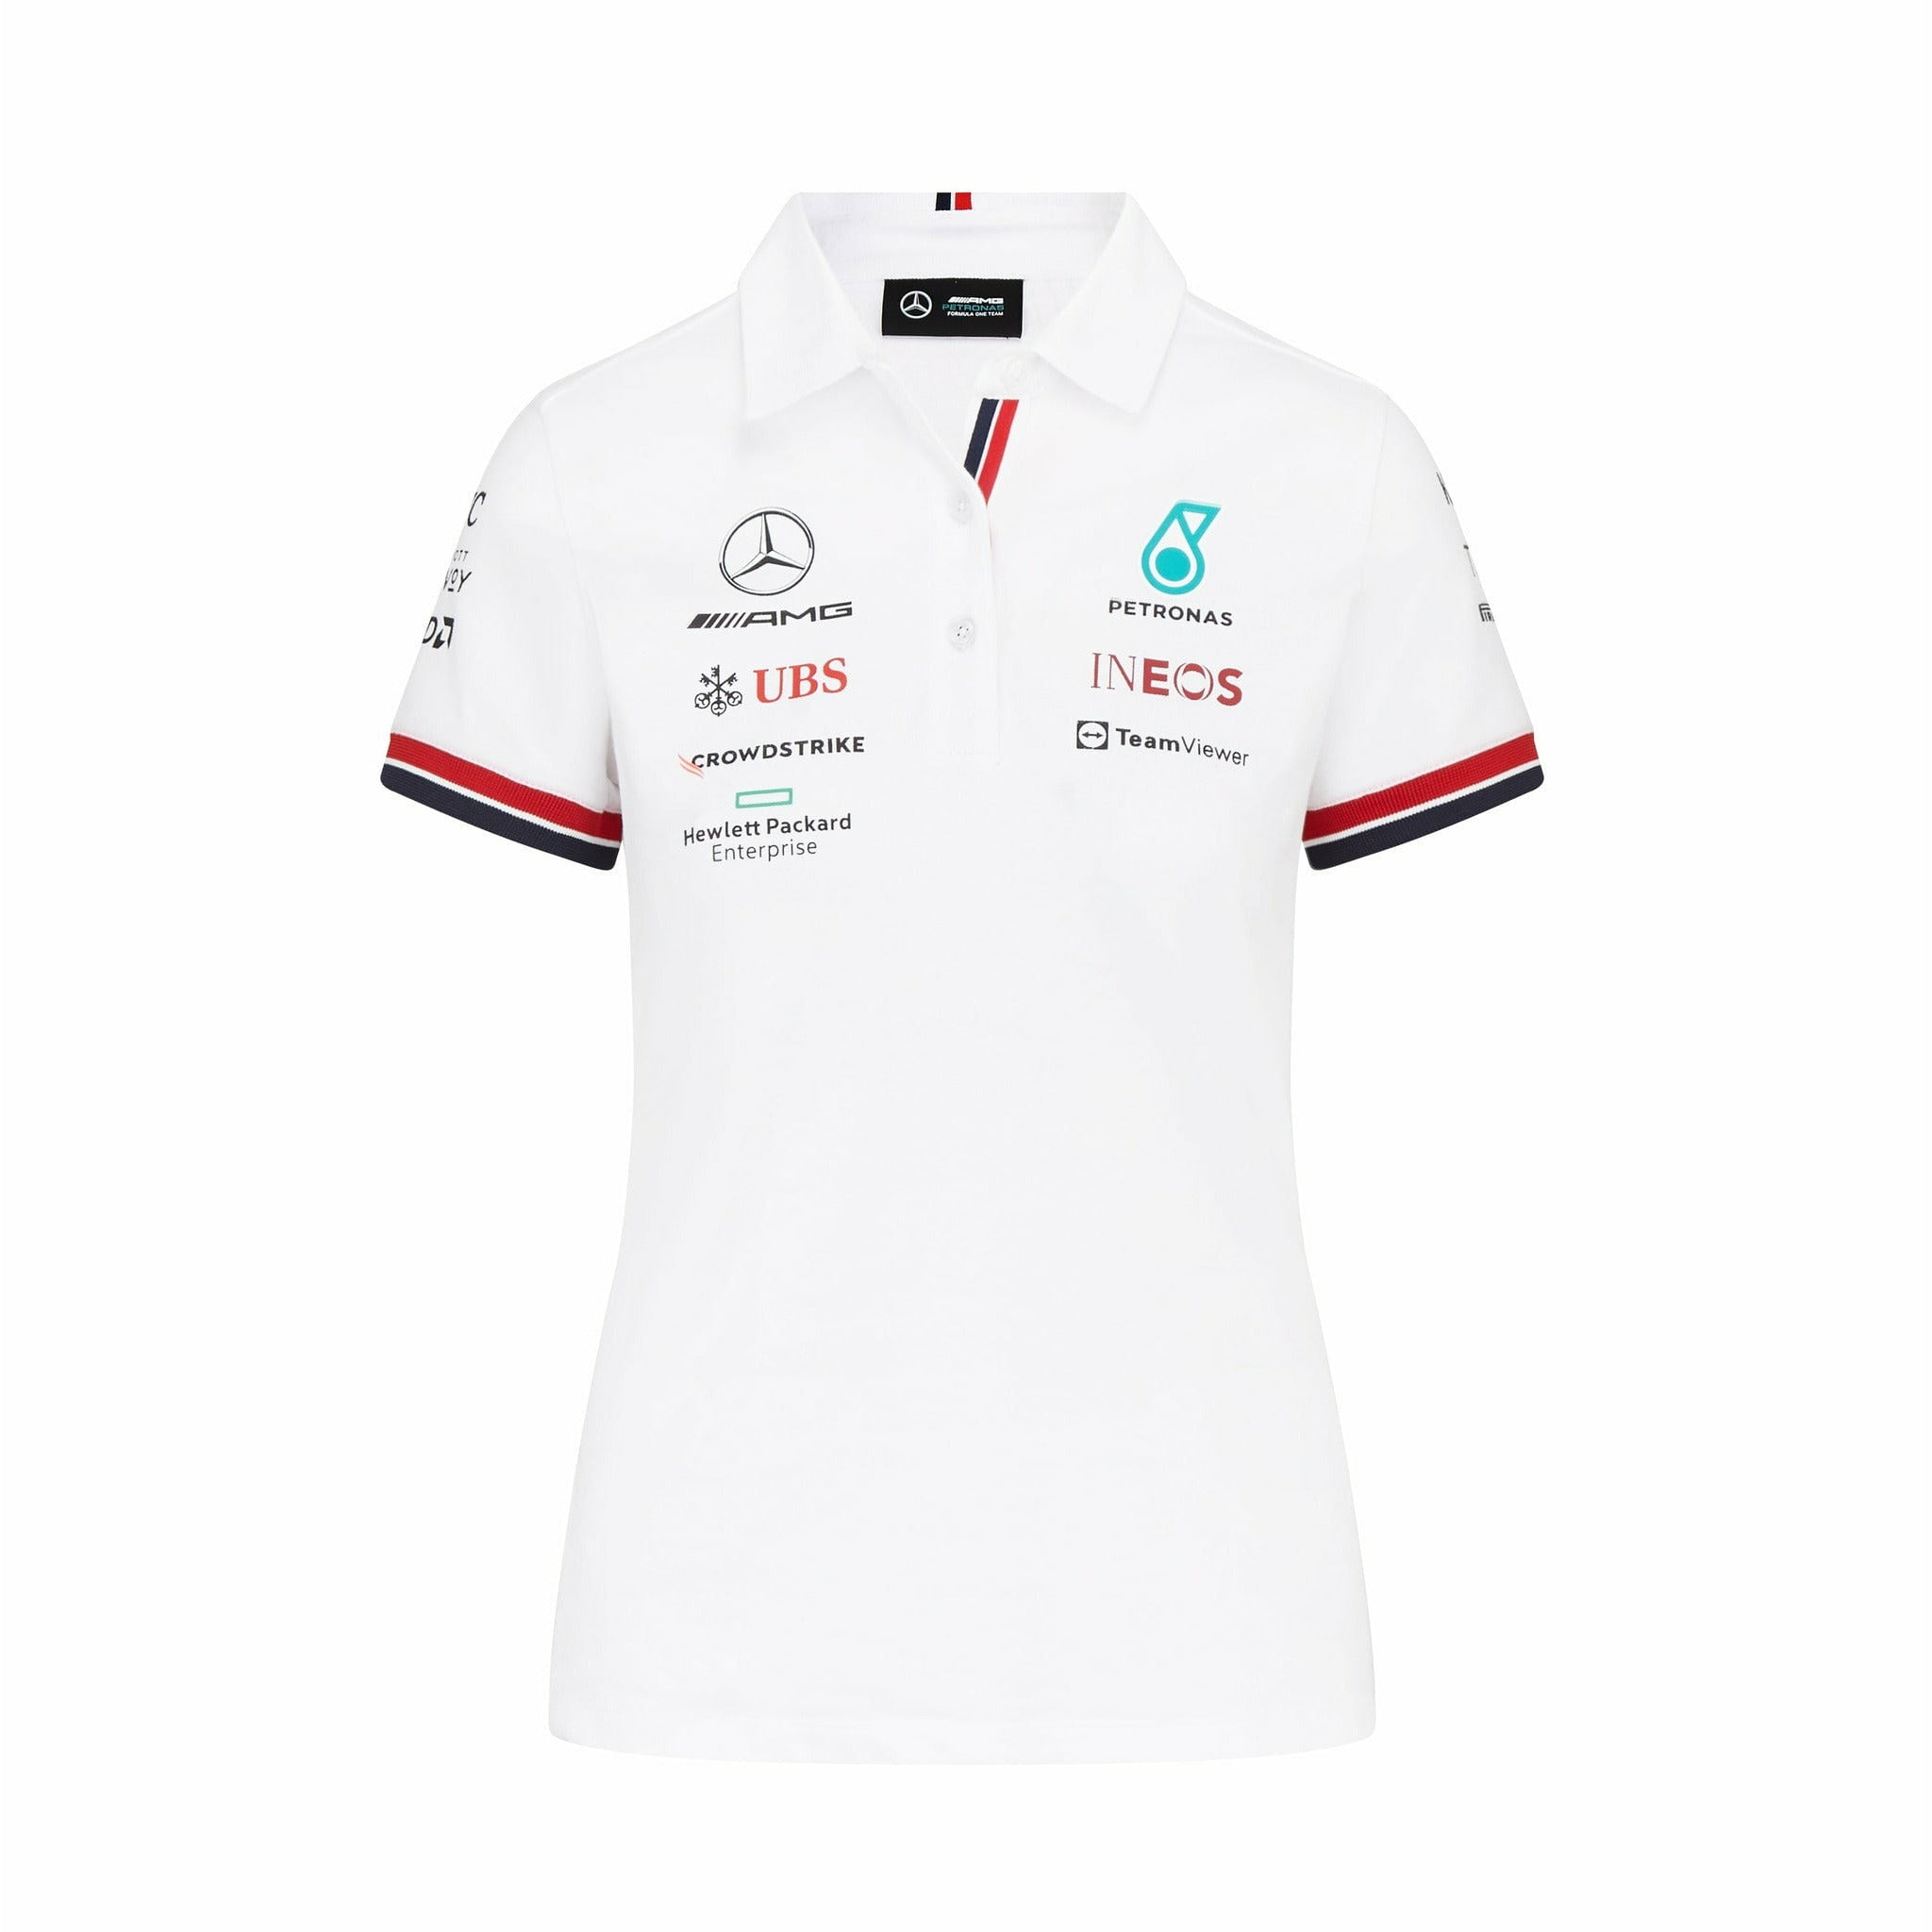 2019 Mercedes-AMG F1 Official Ladies Fitted Team Polo Shirt for Women and Girls 